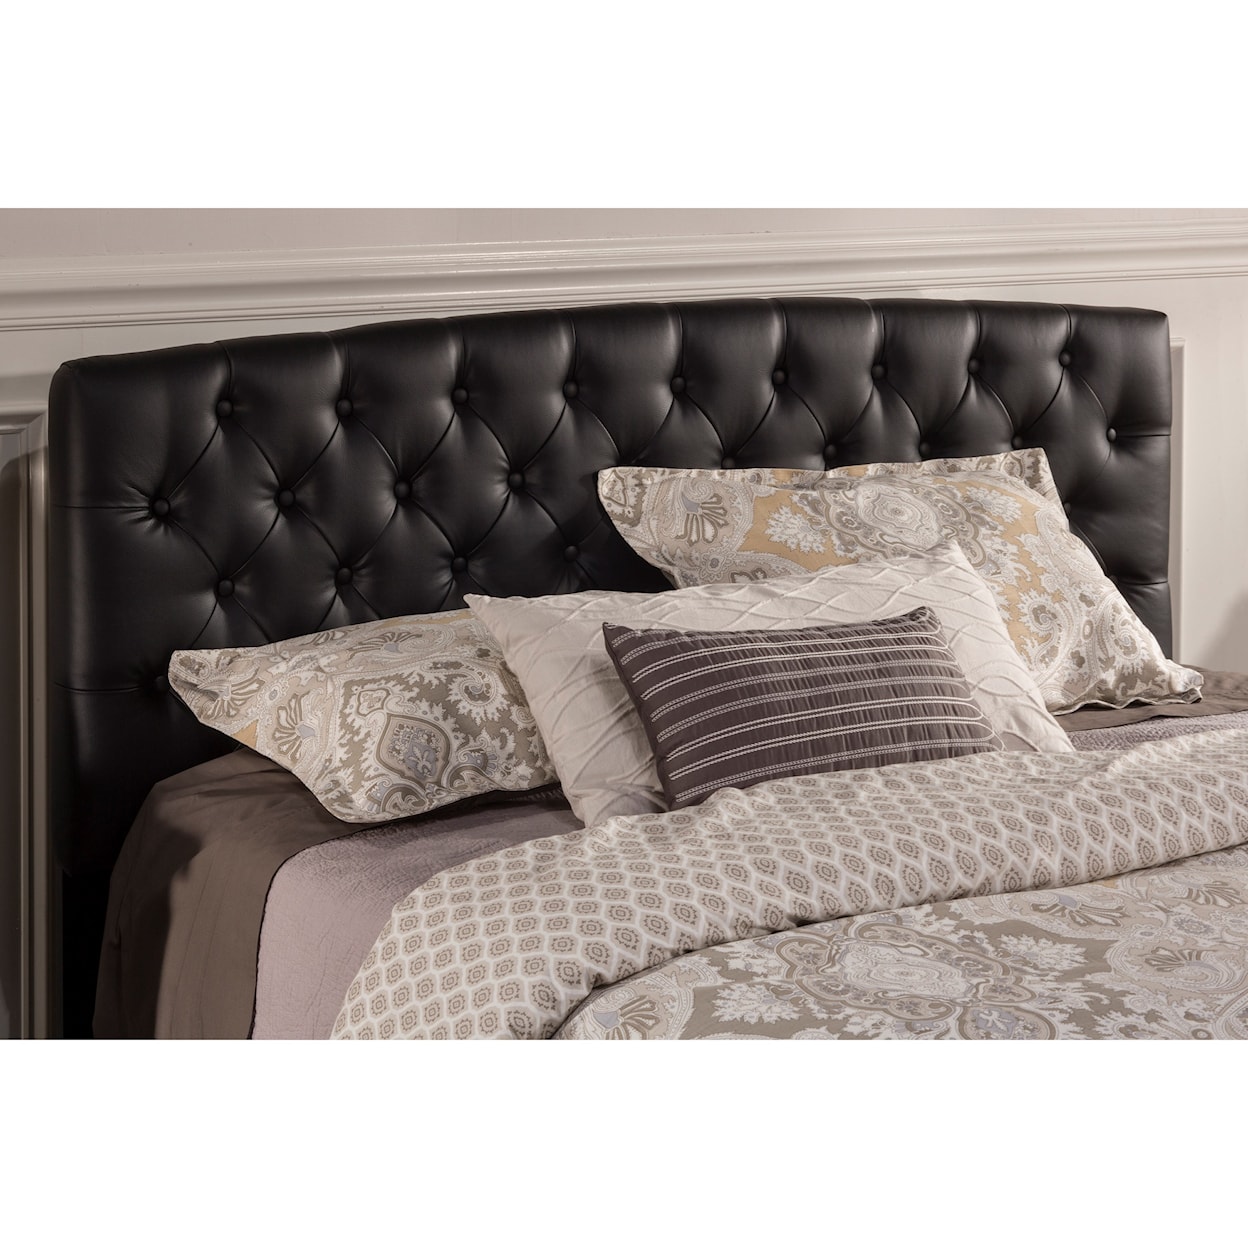 Hillsdale Upholstered Beds Queen Headboard with Frame